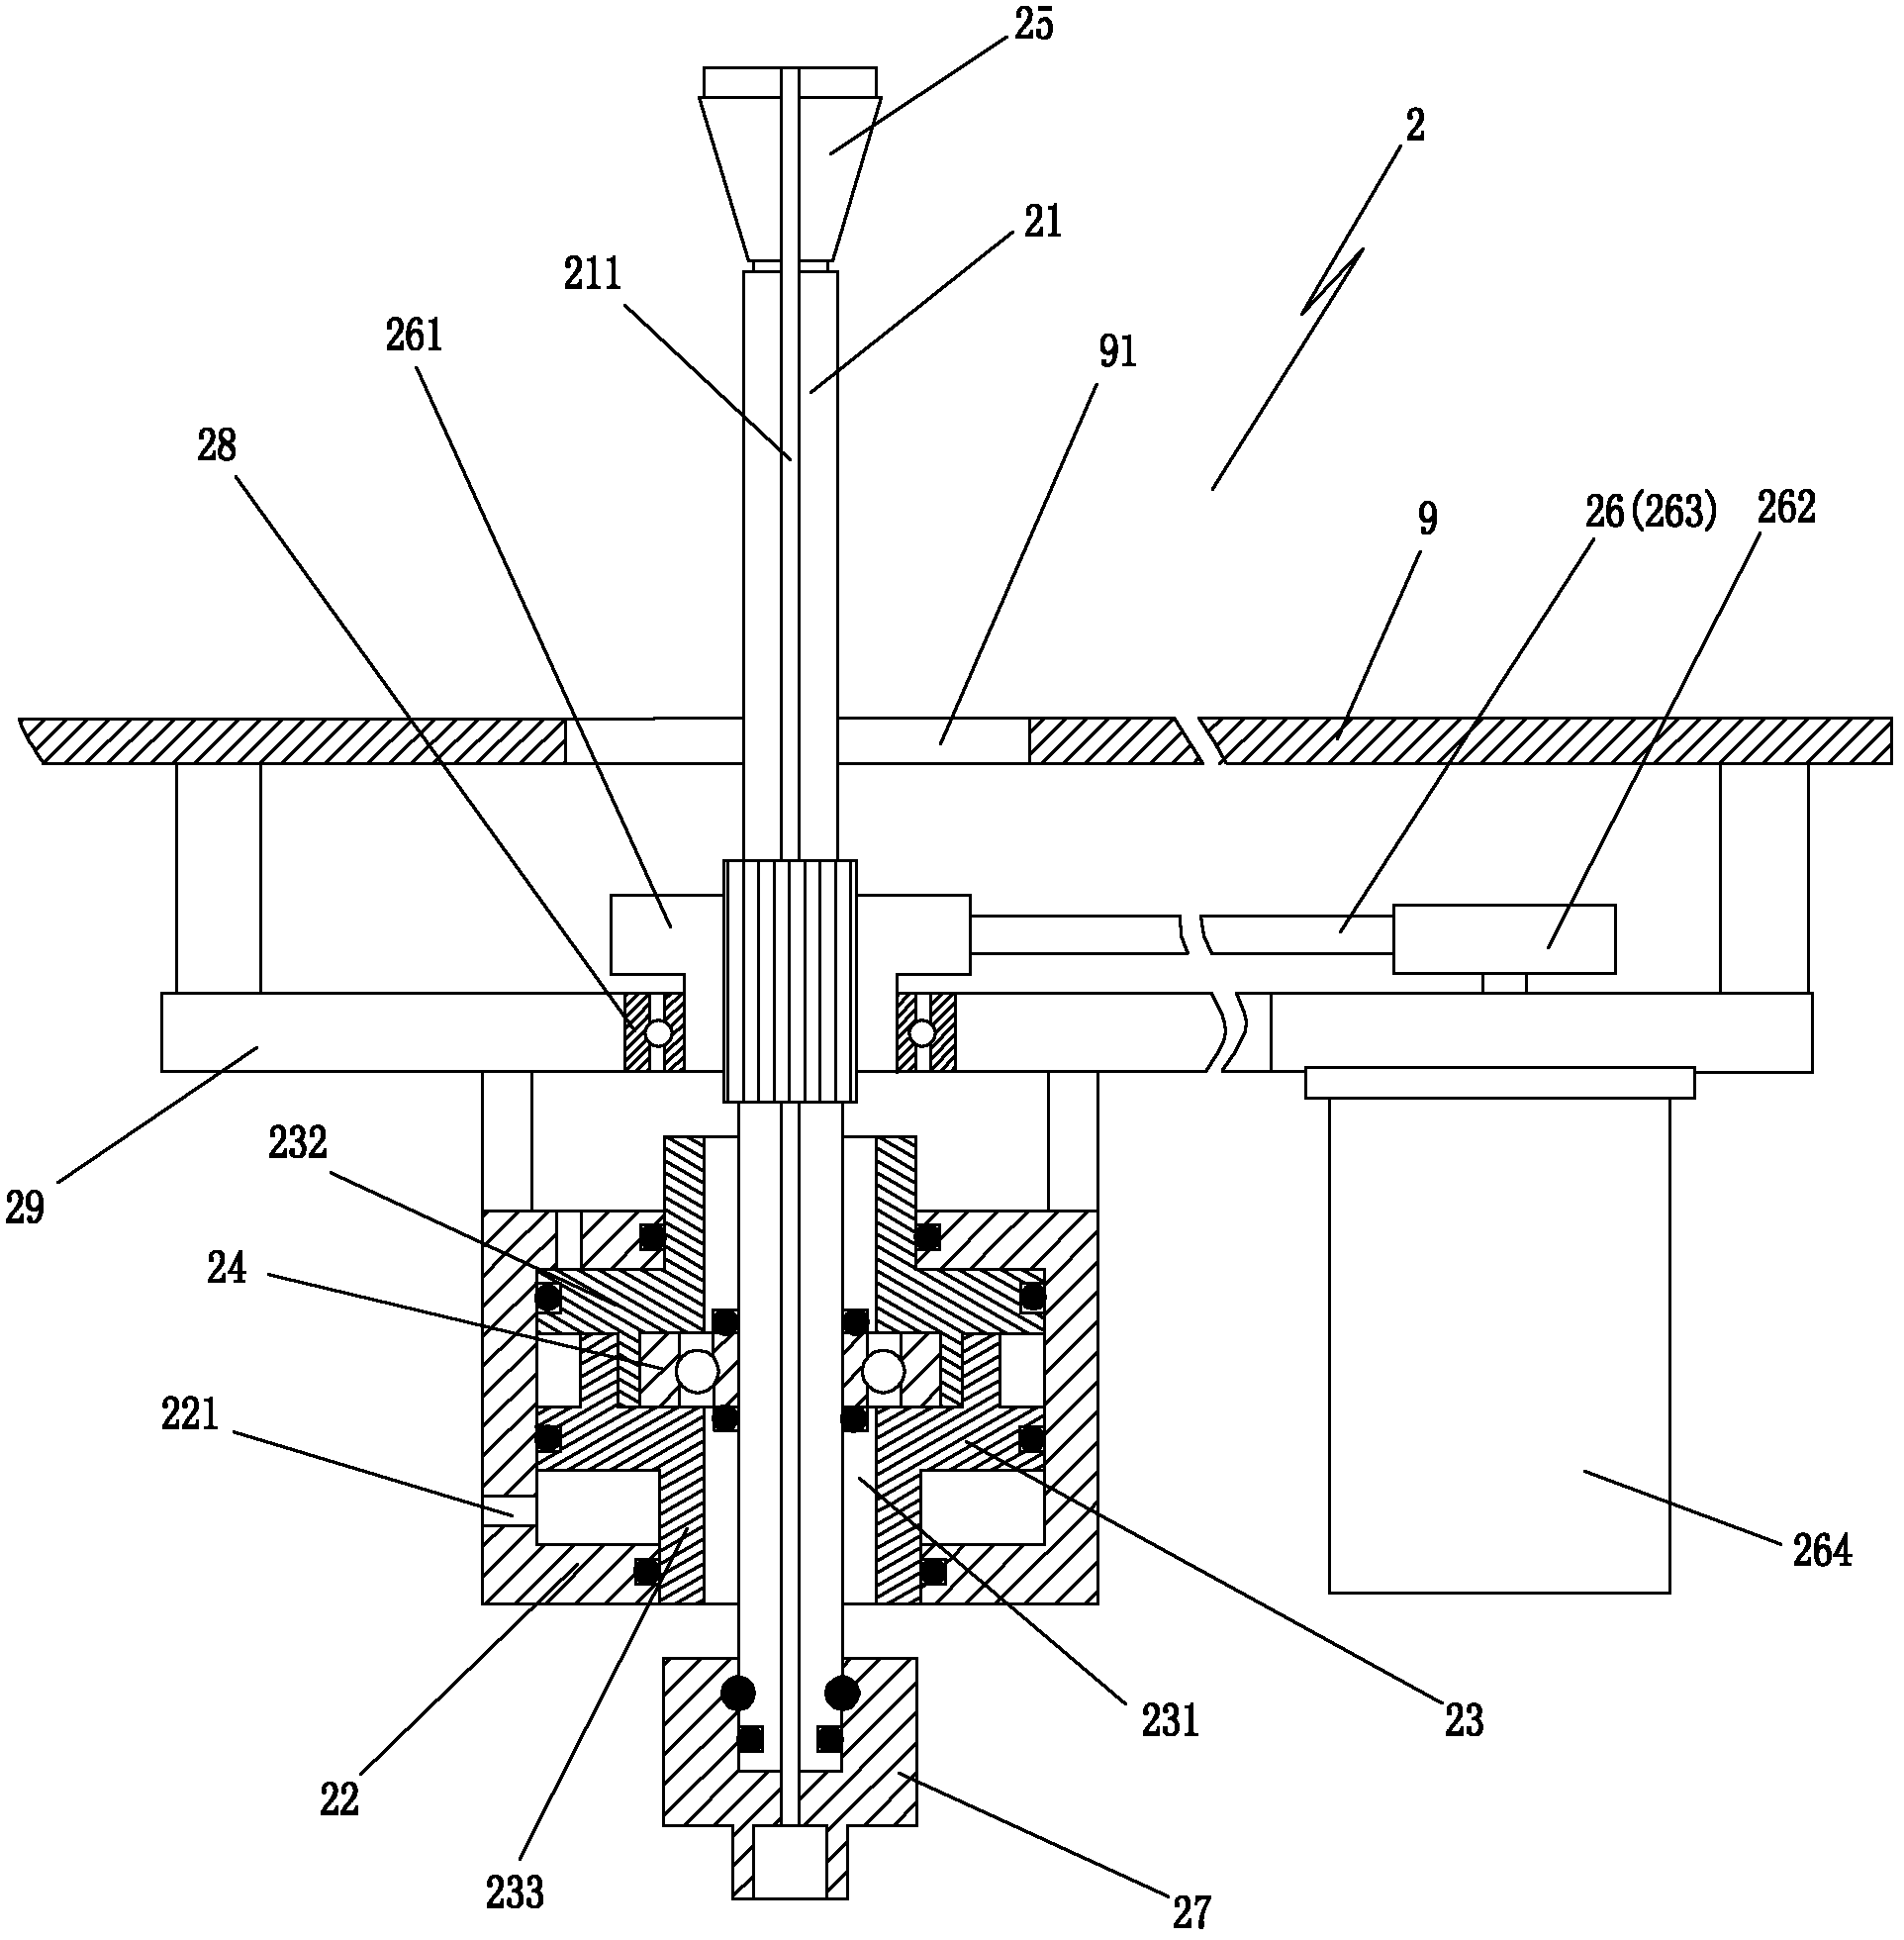 Drilling simulation experiment device